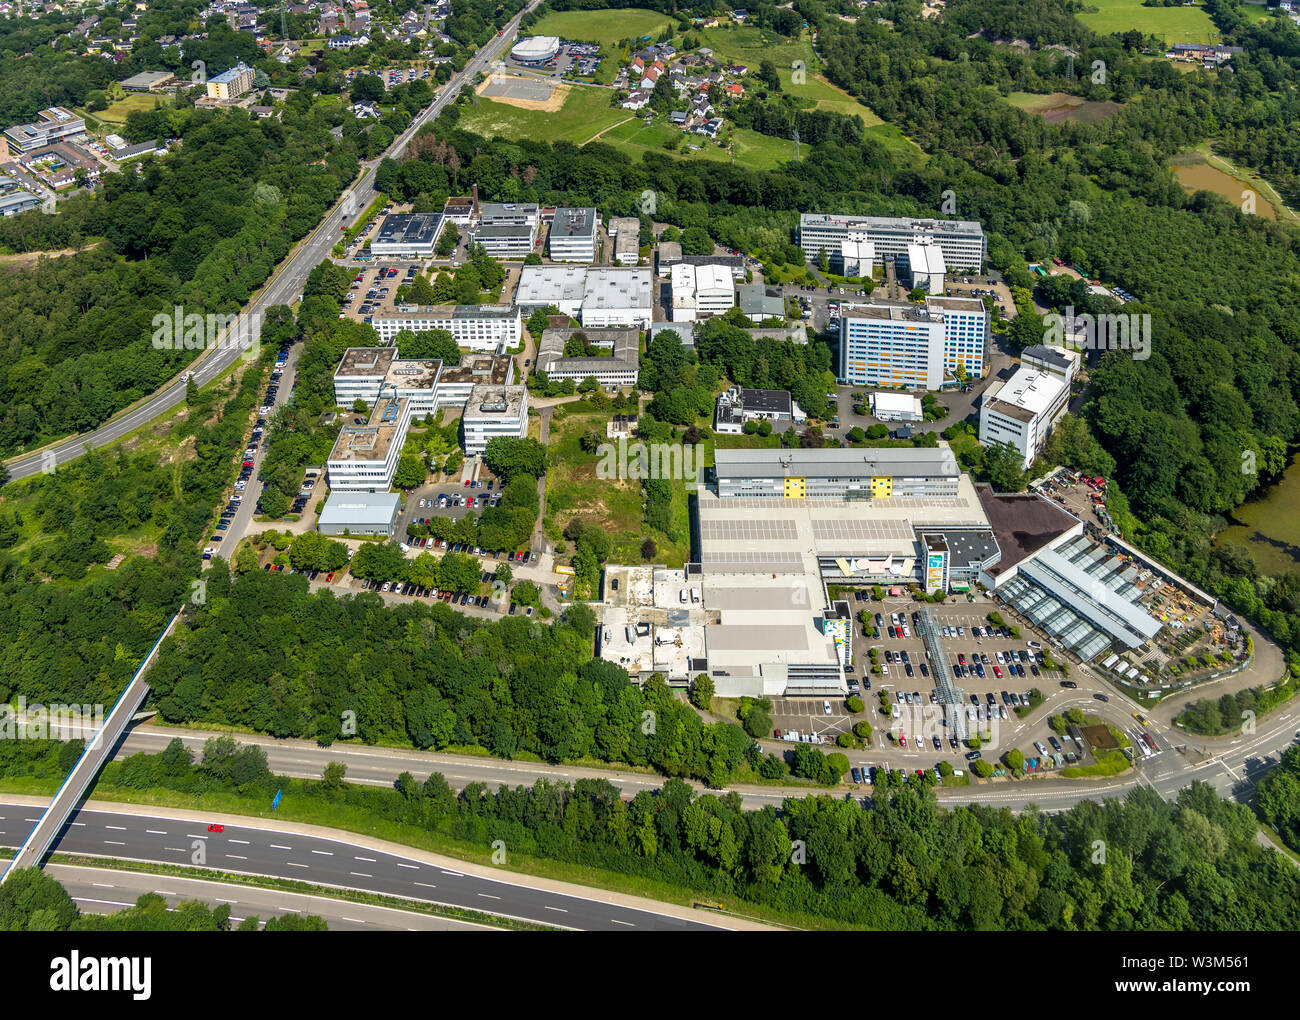 Aerial view of the commercial area Bensberg at the A4 motorway in Bergisch Gladbach in Bergisches Land in the state of North Rhine-Westphalia, Germany Stock Photo